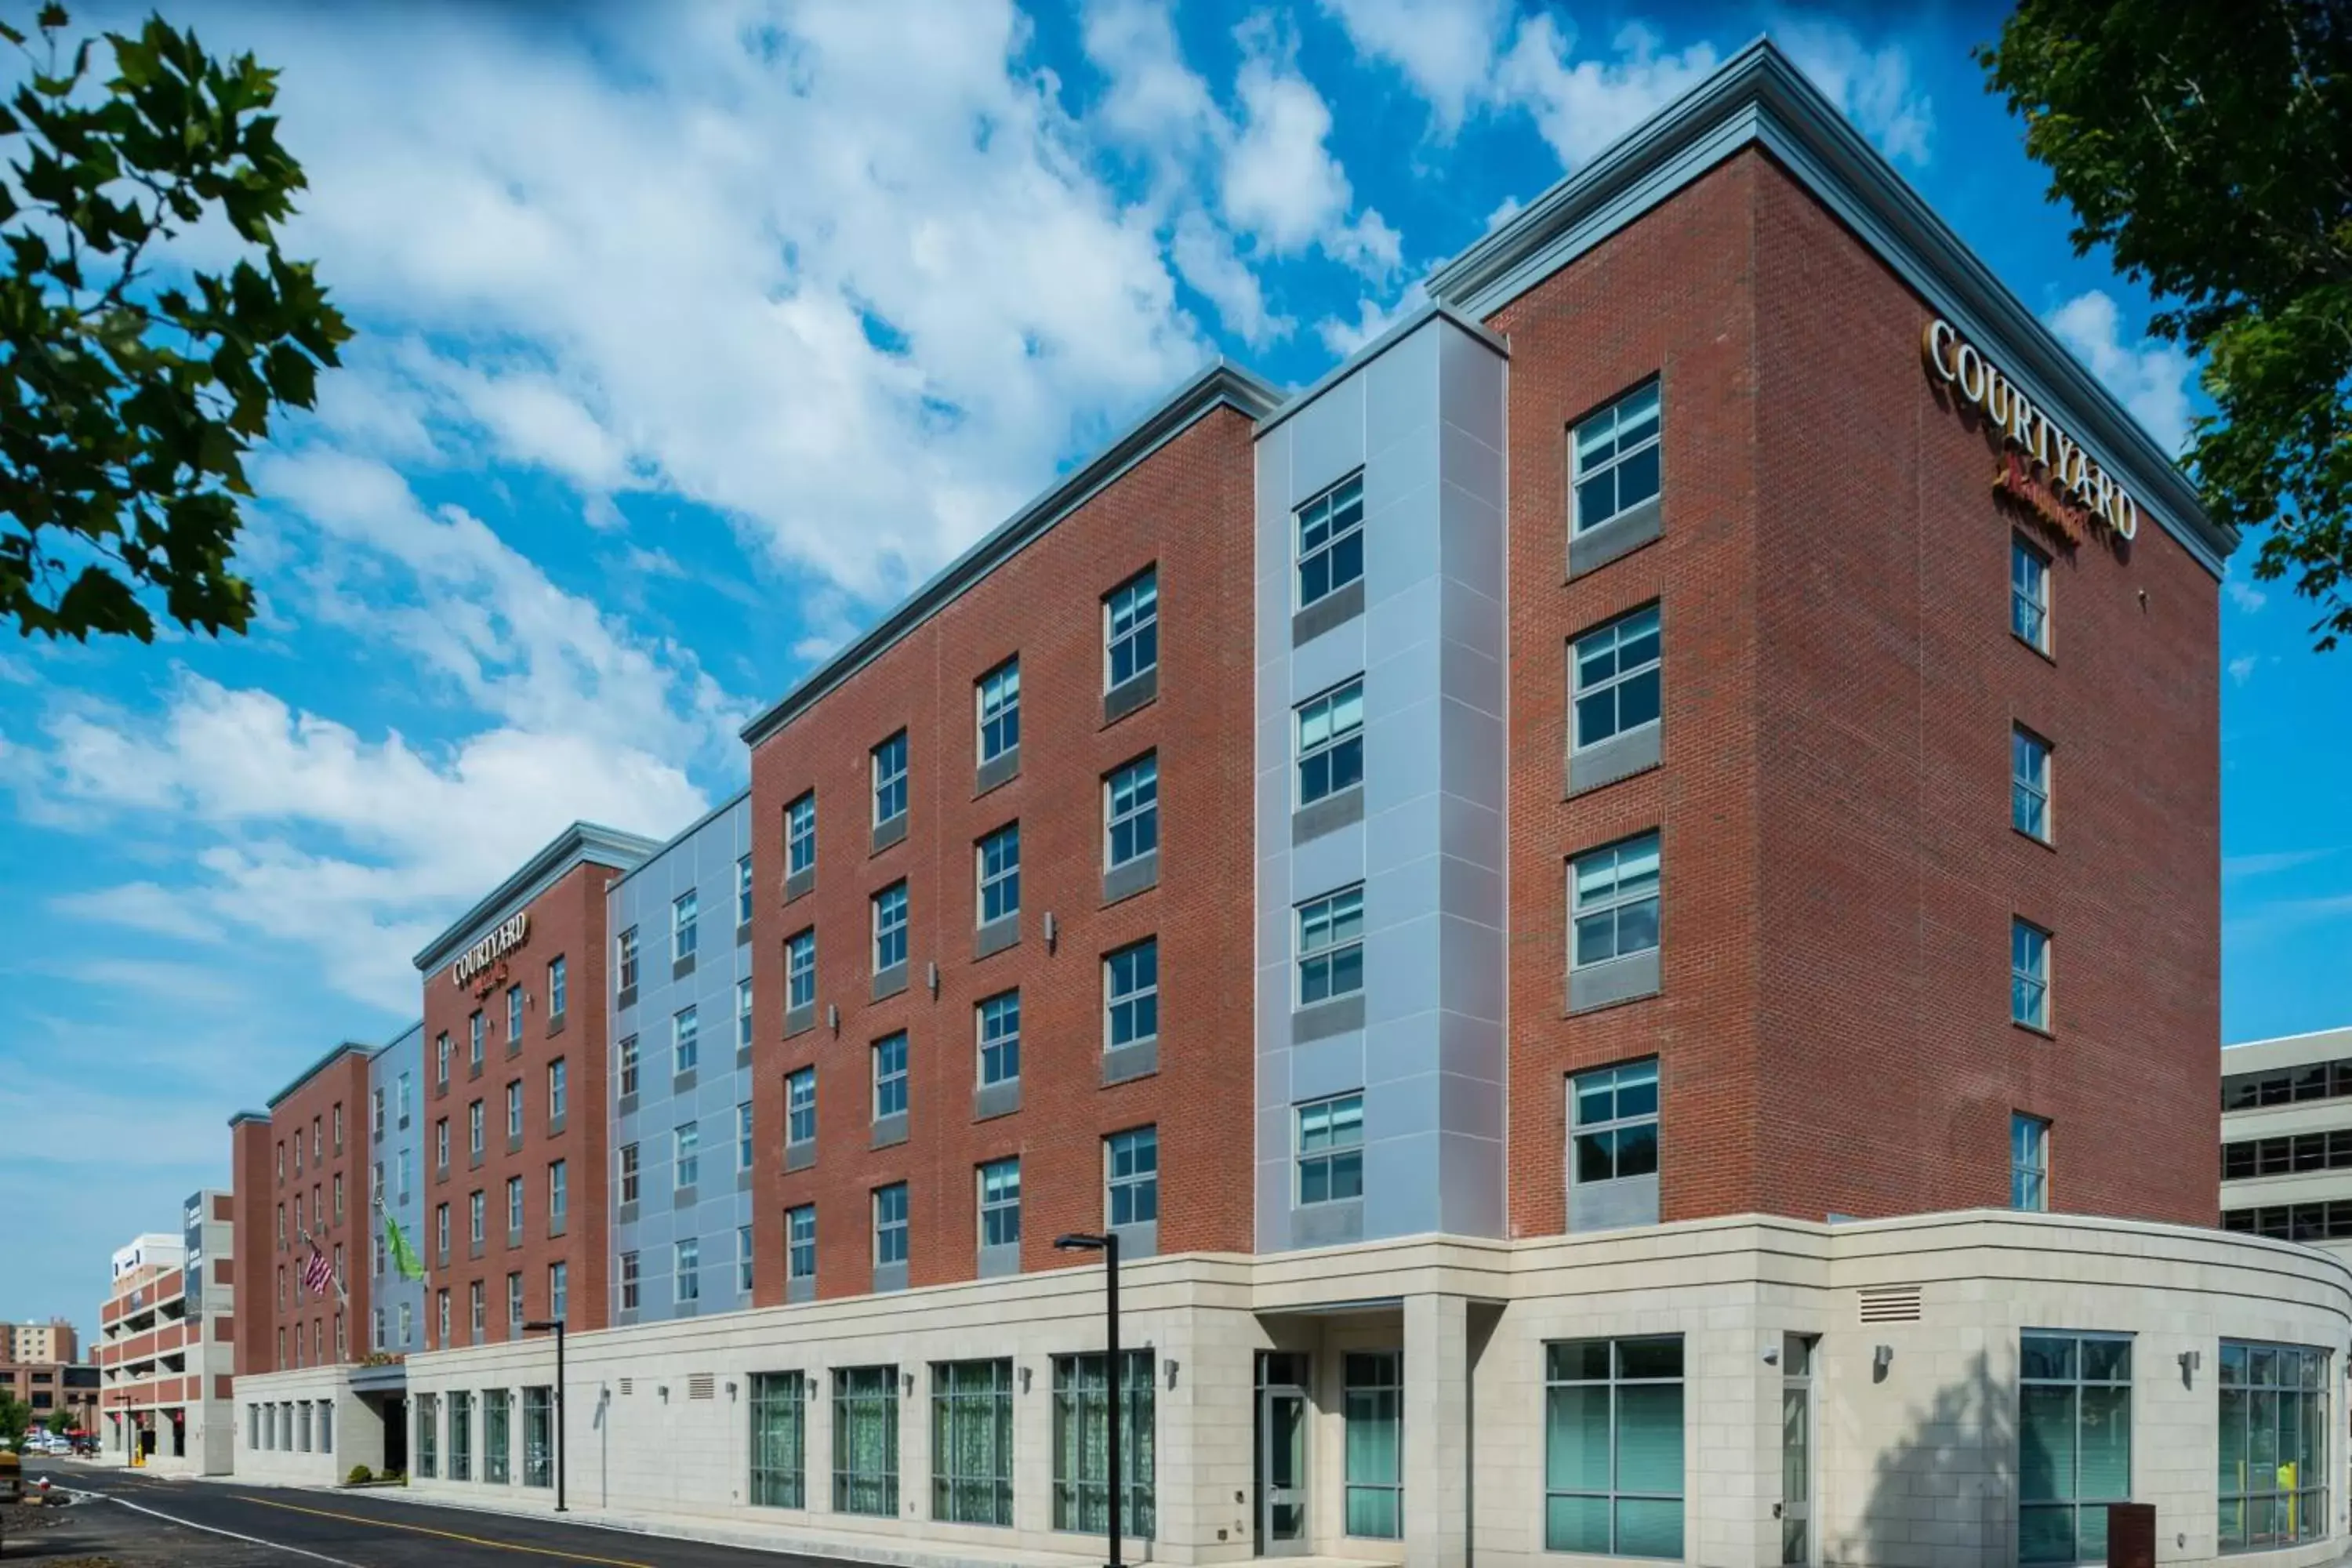 Property Building in Courtyard by Marriott Edgewater NYC Area